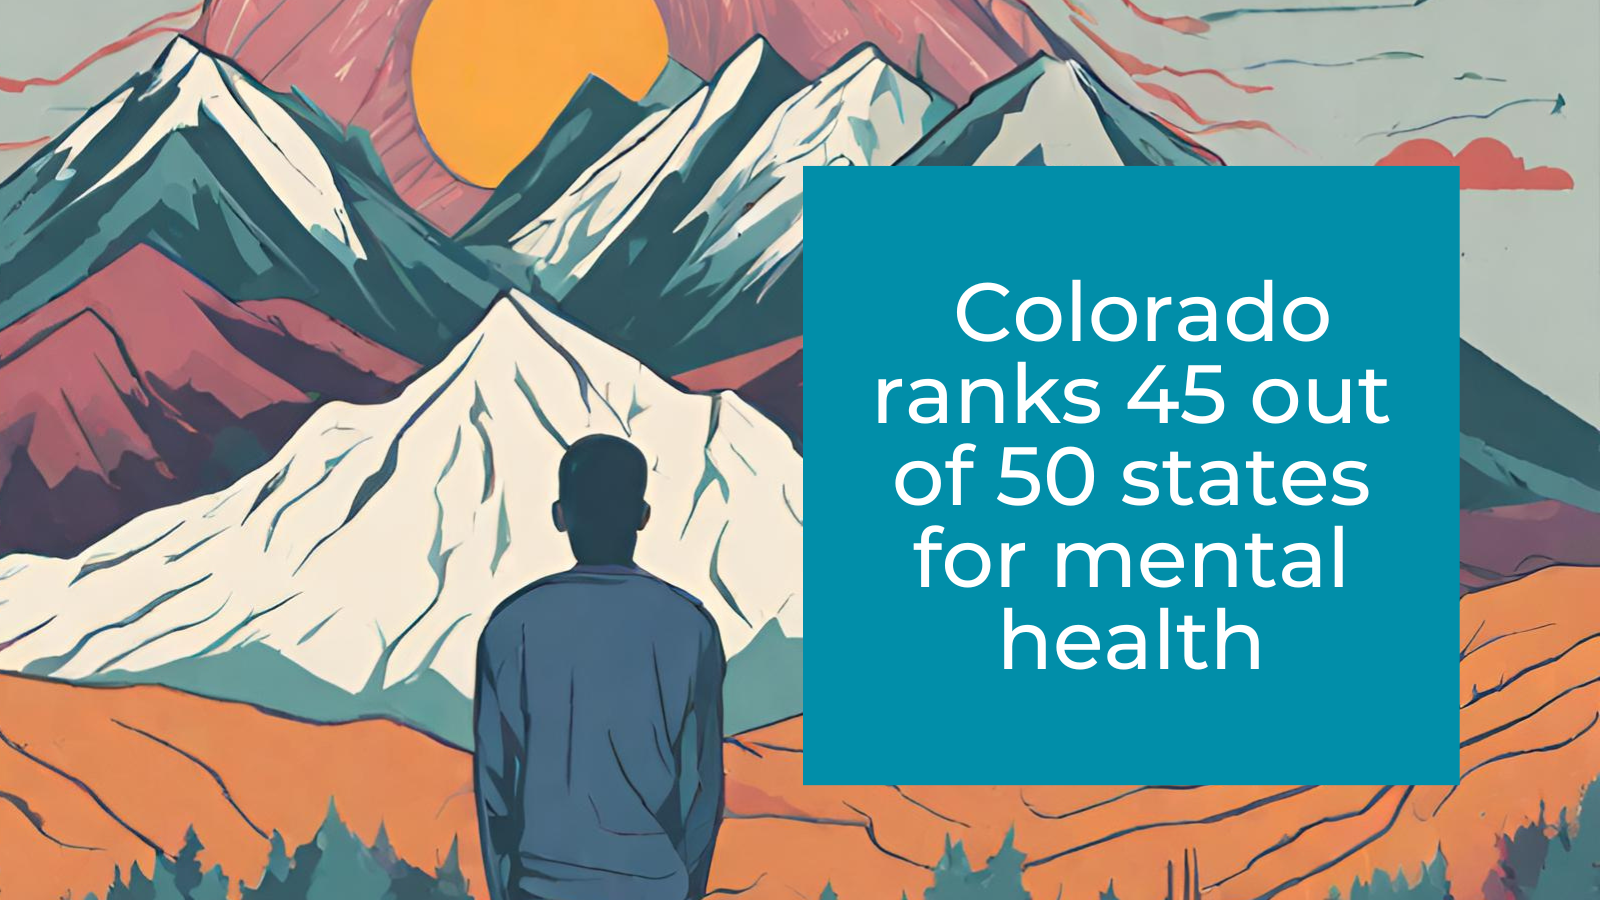 Illustration of a man in front of mountains reveals that colorado ranks 45 out of 50 states for mental health